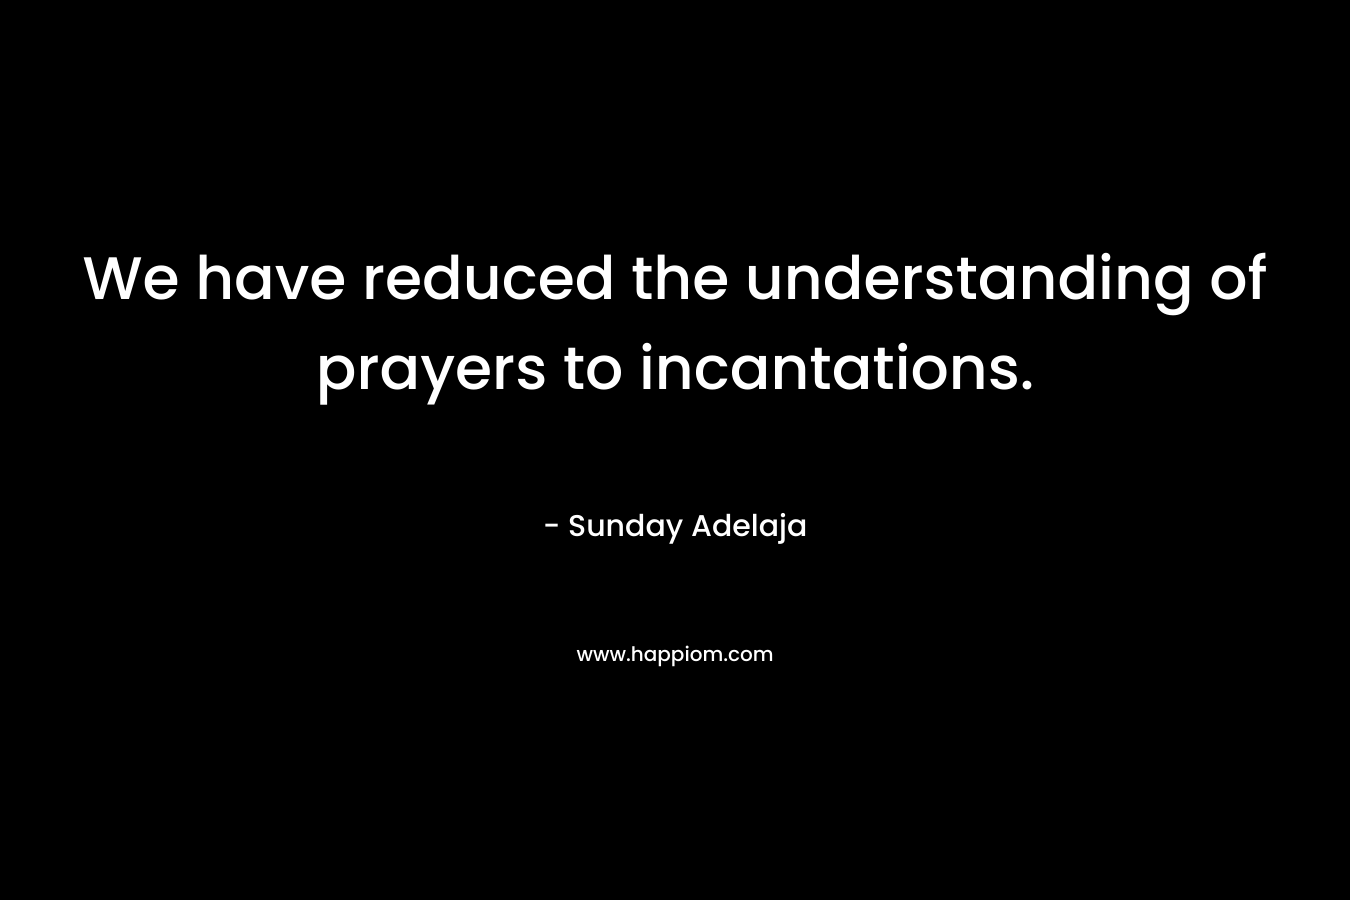 We have reduced the understanding of prayers to incantations.